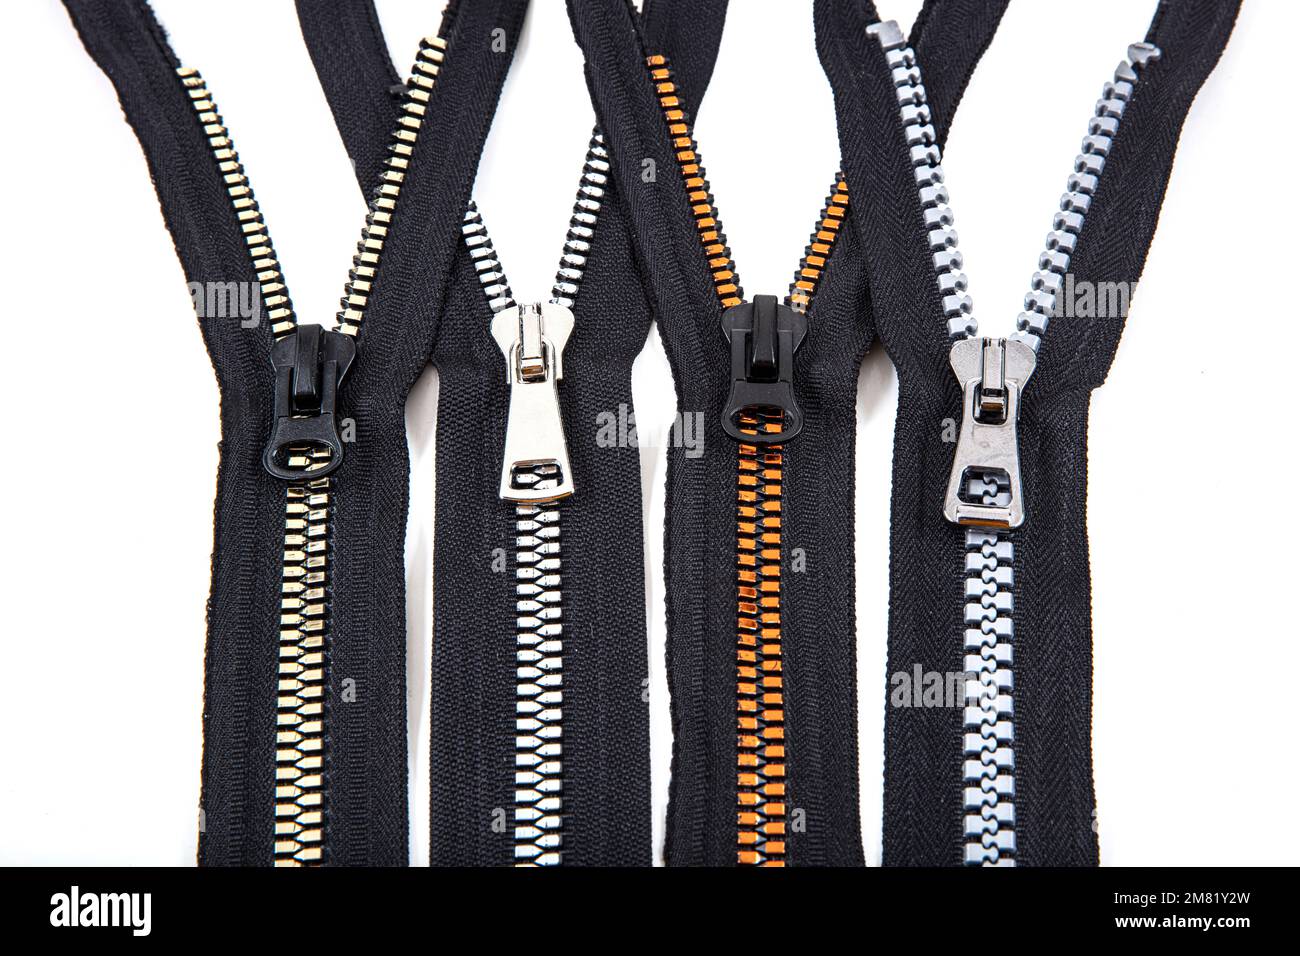 Jacket Winter Coat Black Tape Heavy Duty Zippers Large Molded Plastic Zippers. Close-up of zipper slider on a white surface. Sewing production, materi Stock Photo